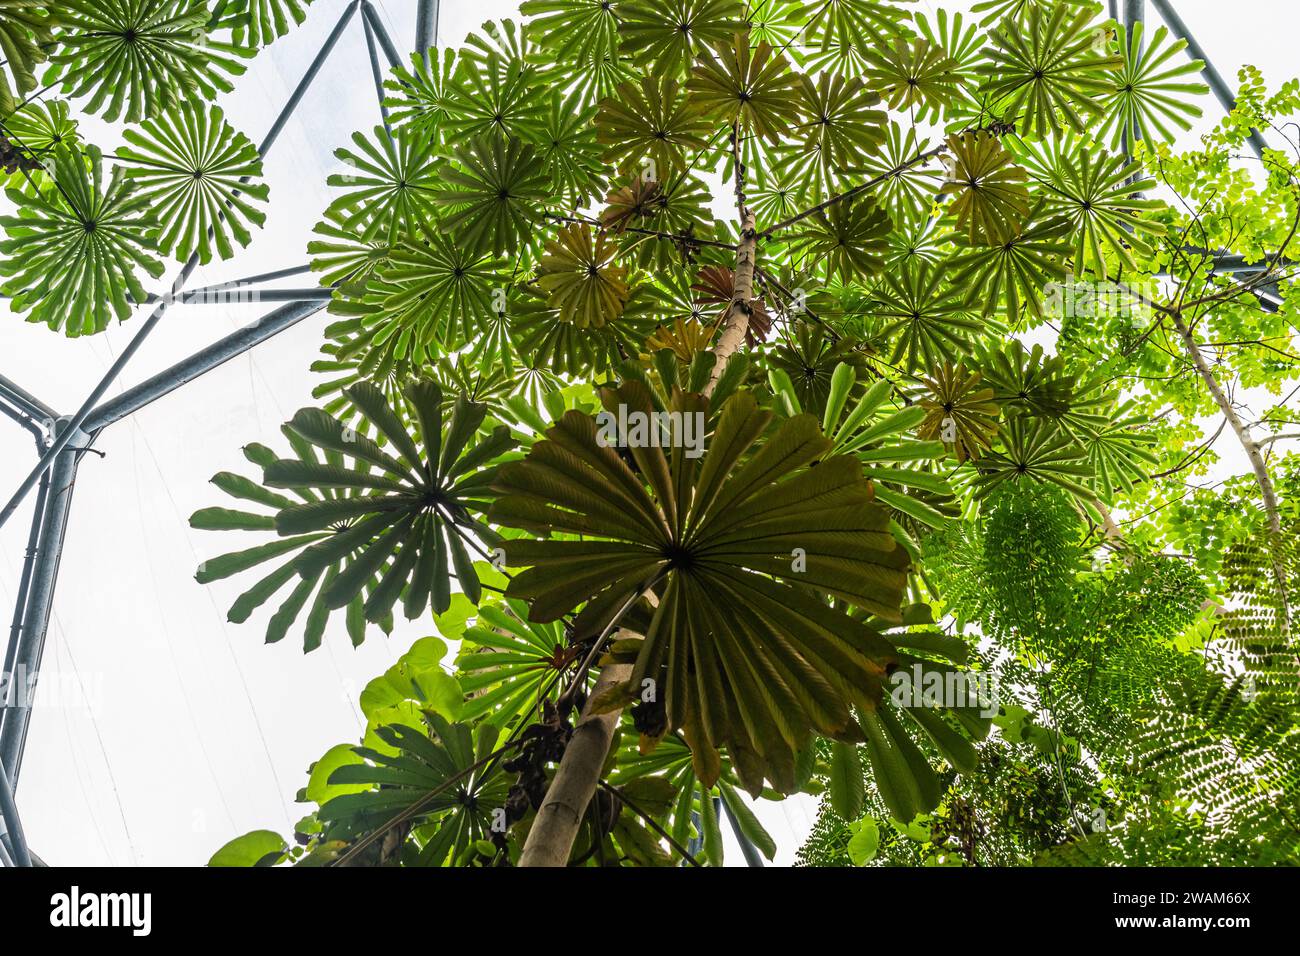 Large rainforest plant cecropia tree taken from below Stock Photo